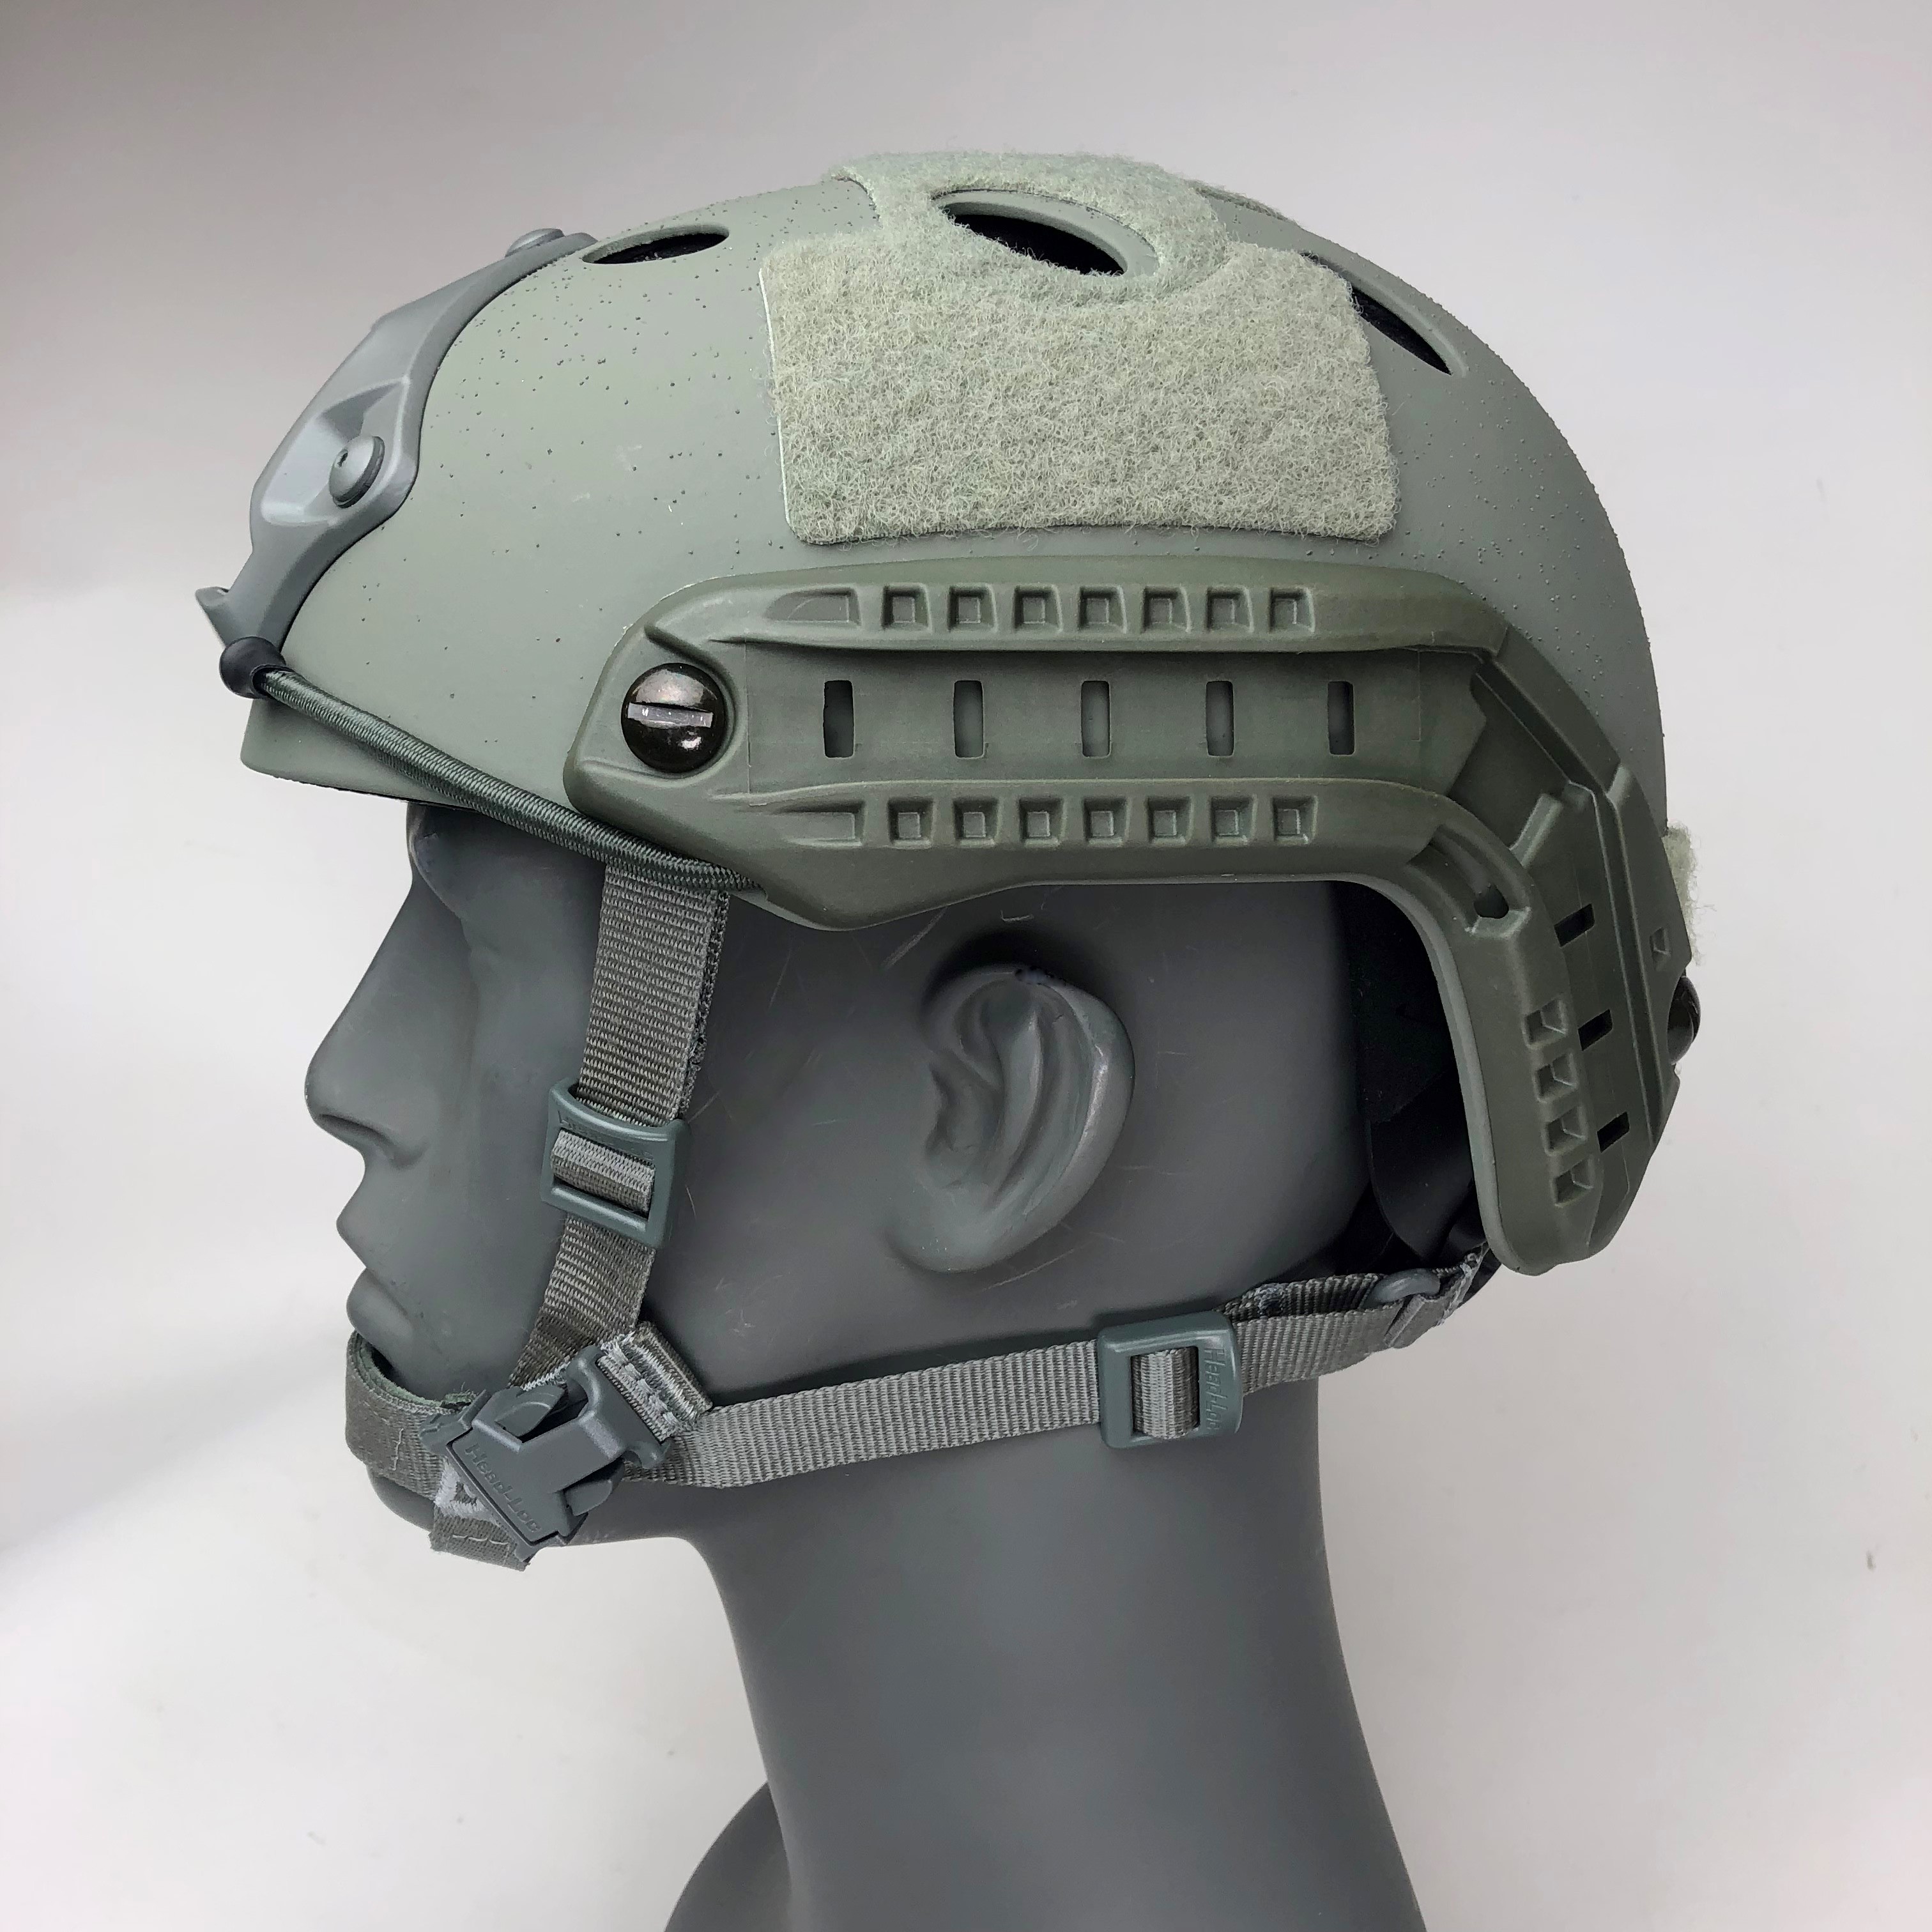 Ops Core Fast Carbon High Cut Helmet In Foliage Green With Arc Rail